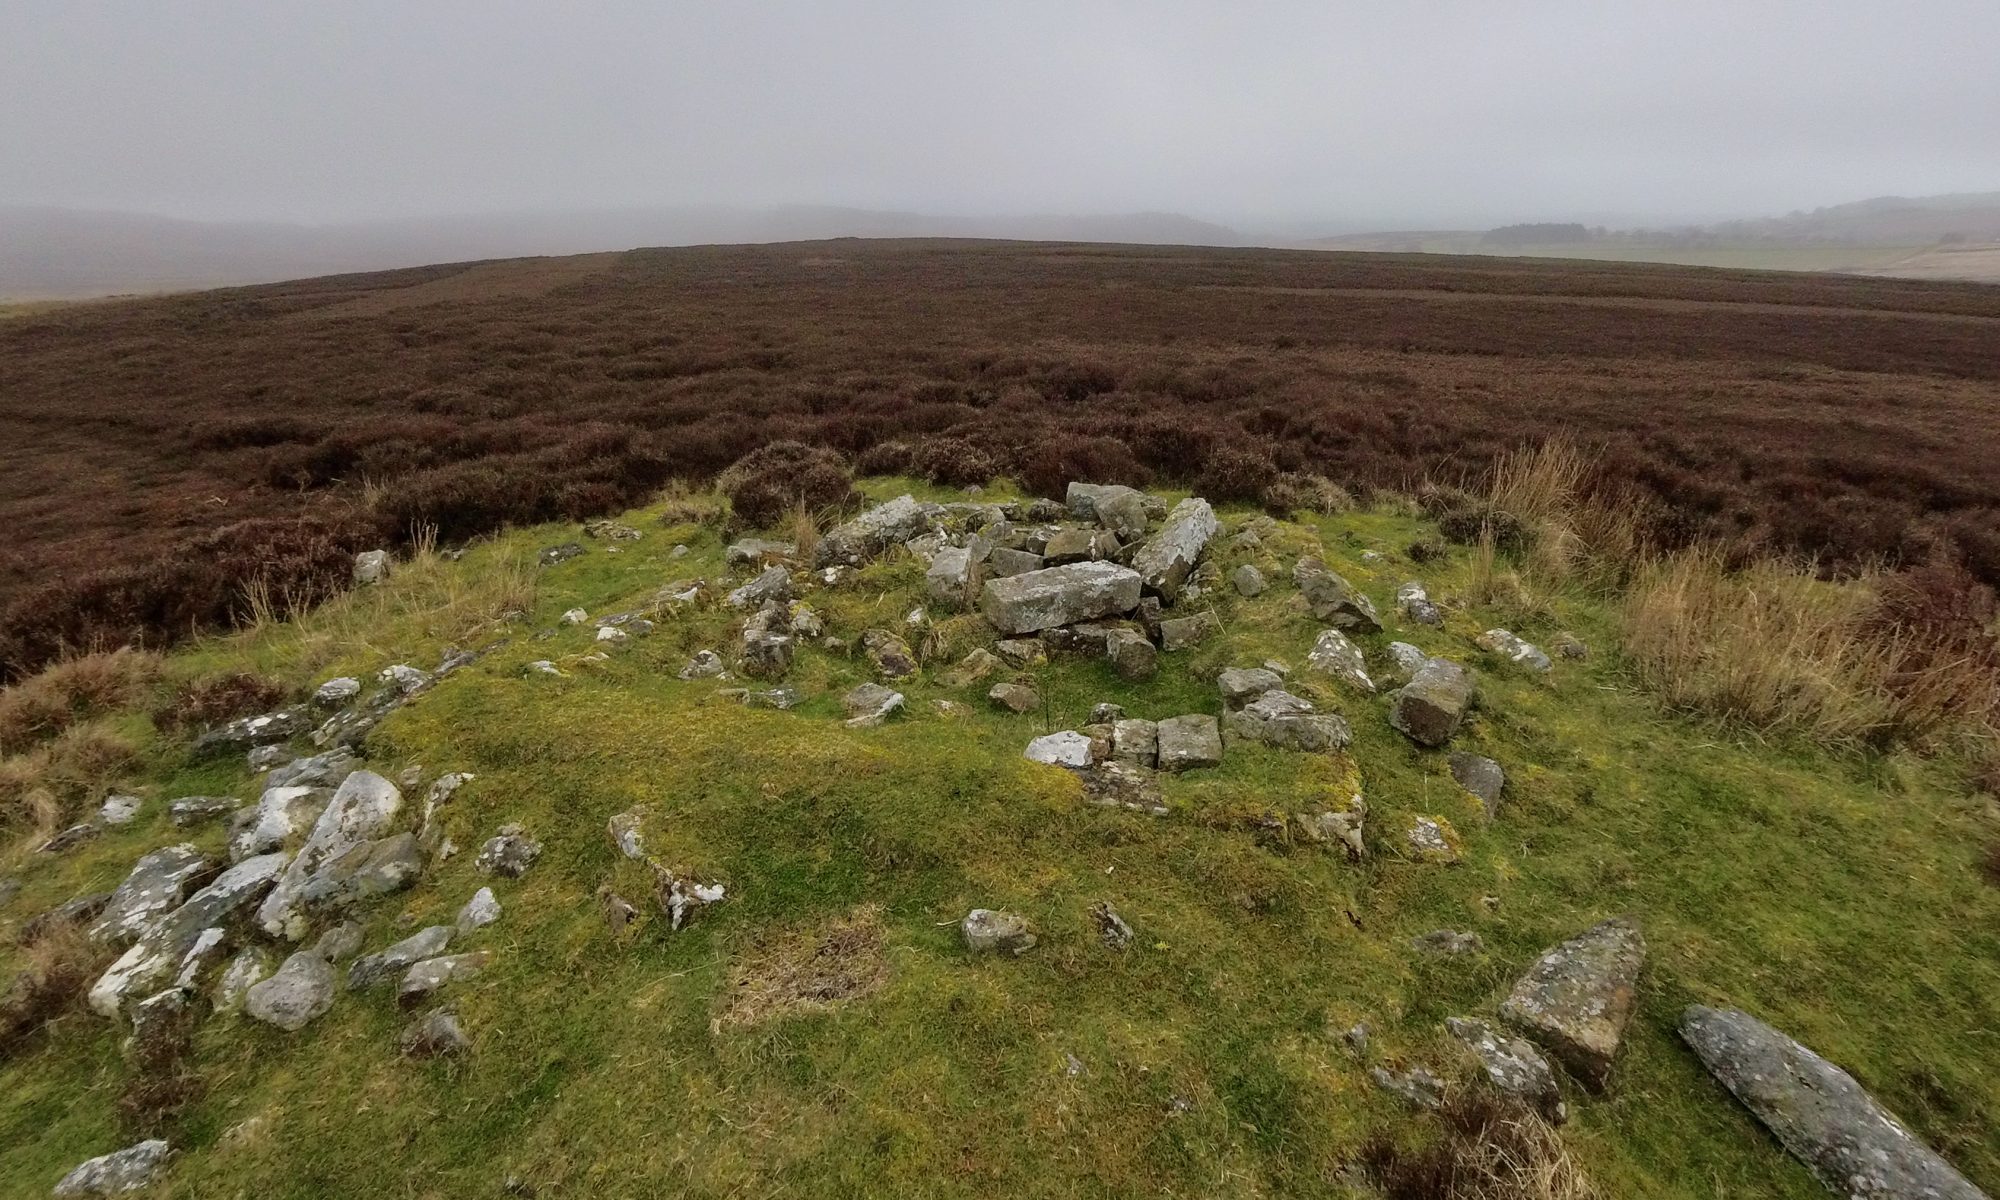 A view of a grass covered Bronze Age burial mound surrounded by heather moorland in drab, wintry colours. A Bronze Age round barrow with an earth and stone mound standing 1.5 metres high. It is round in shape and is 23 metres in diameter. In the centre of the mound are the stone foundations of a shooting hut which dominates the view.